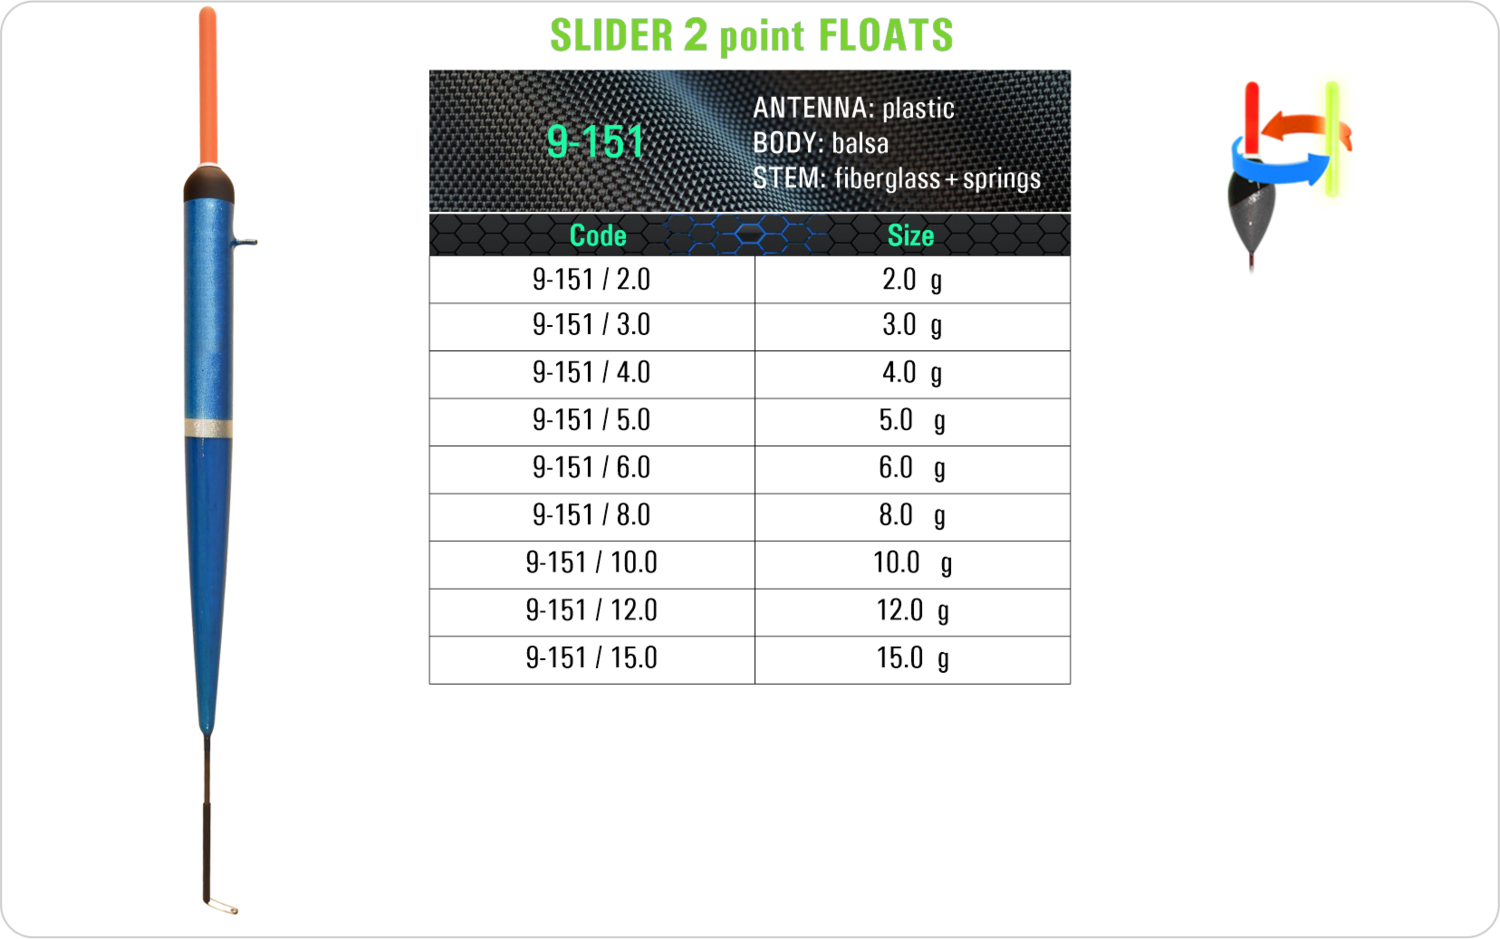 SF 9-151 - Lake and river float model and table containing an additional information about this float with different codes, sizes, types of the body, the stem and the antenna of the float.